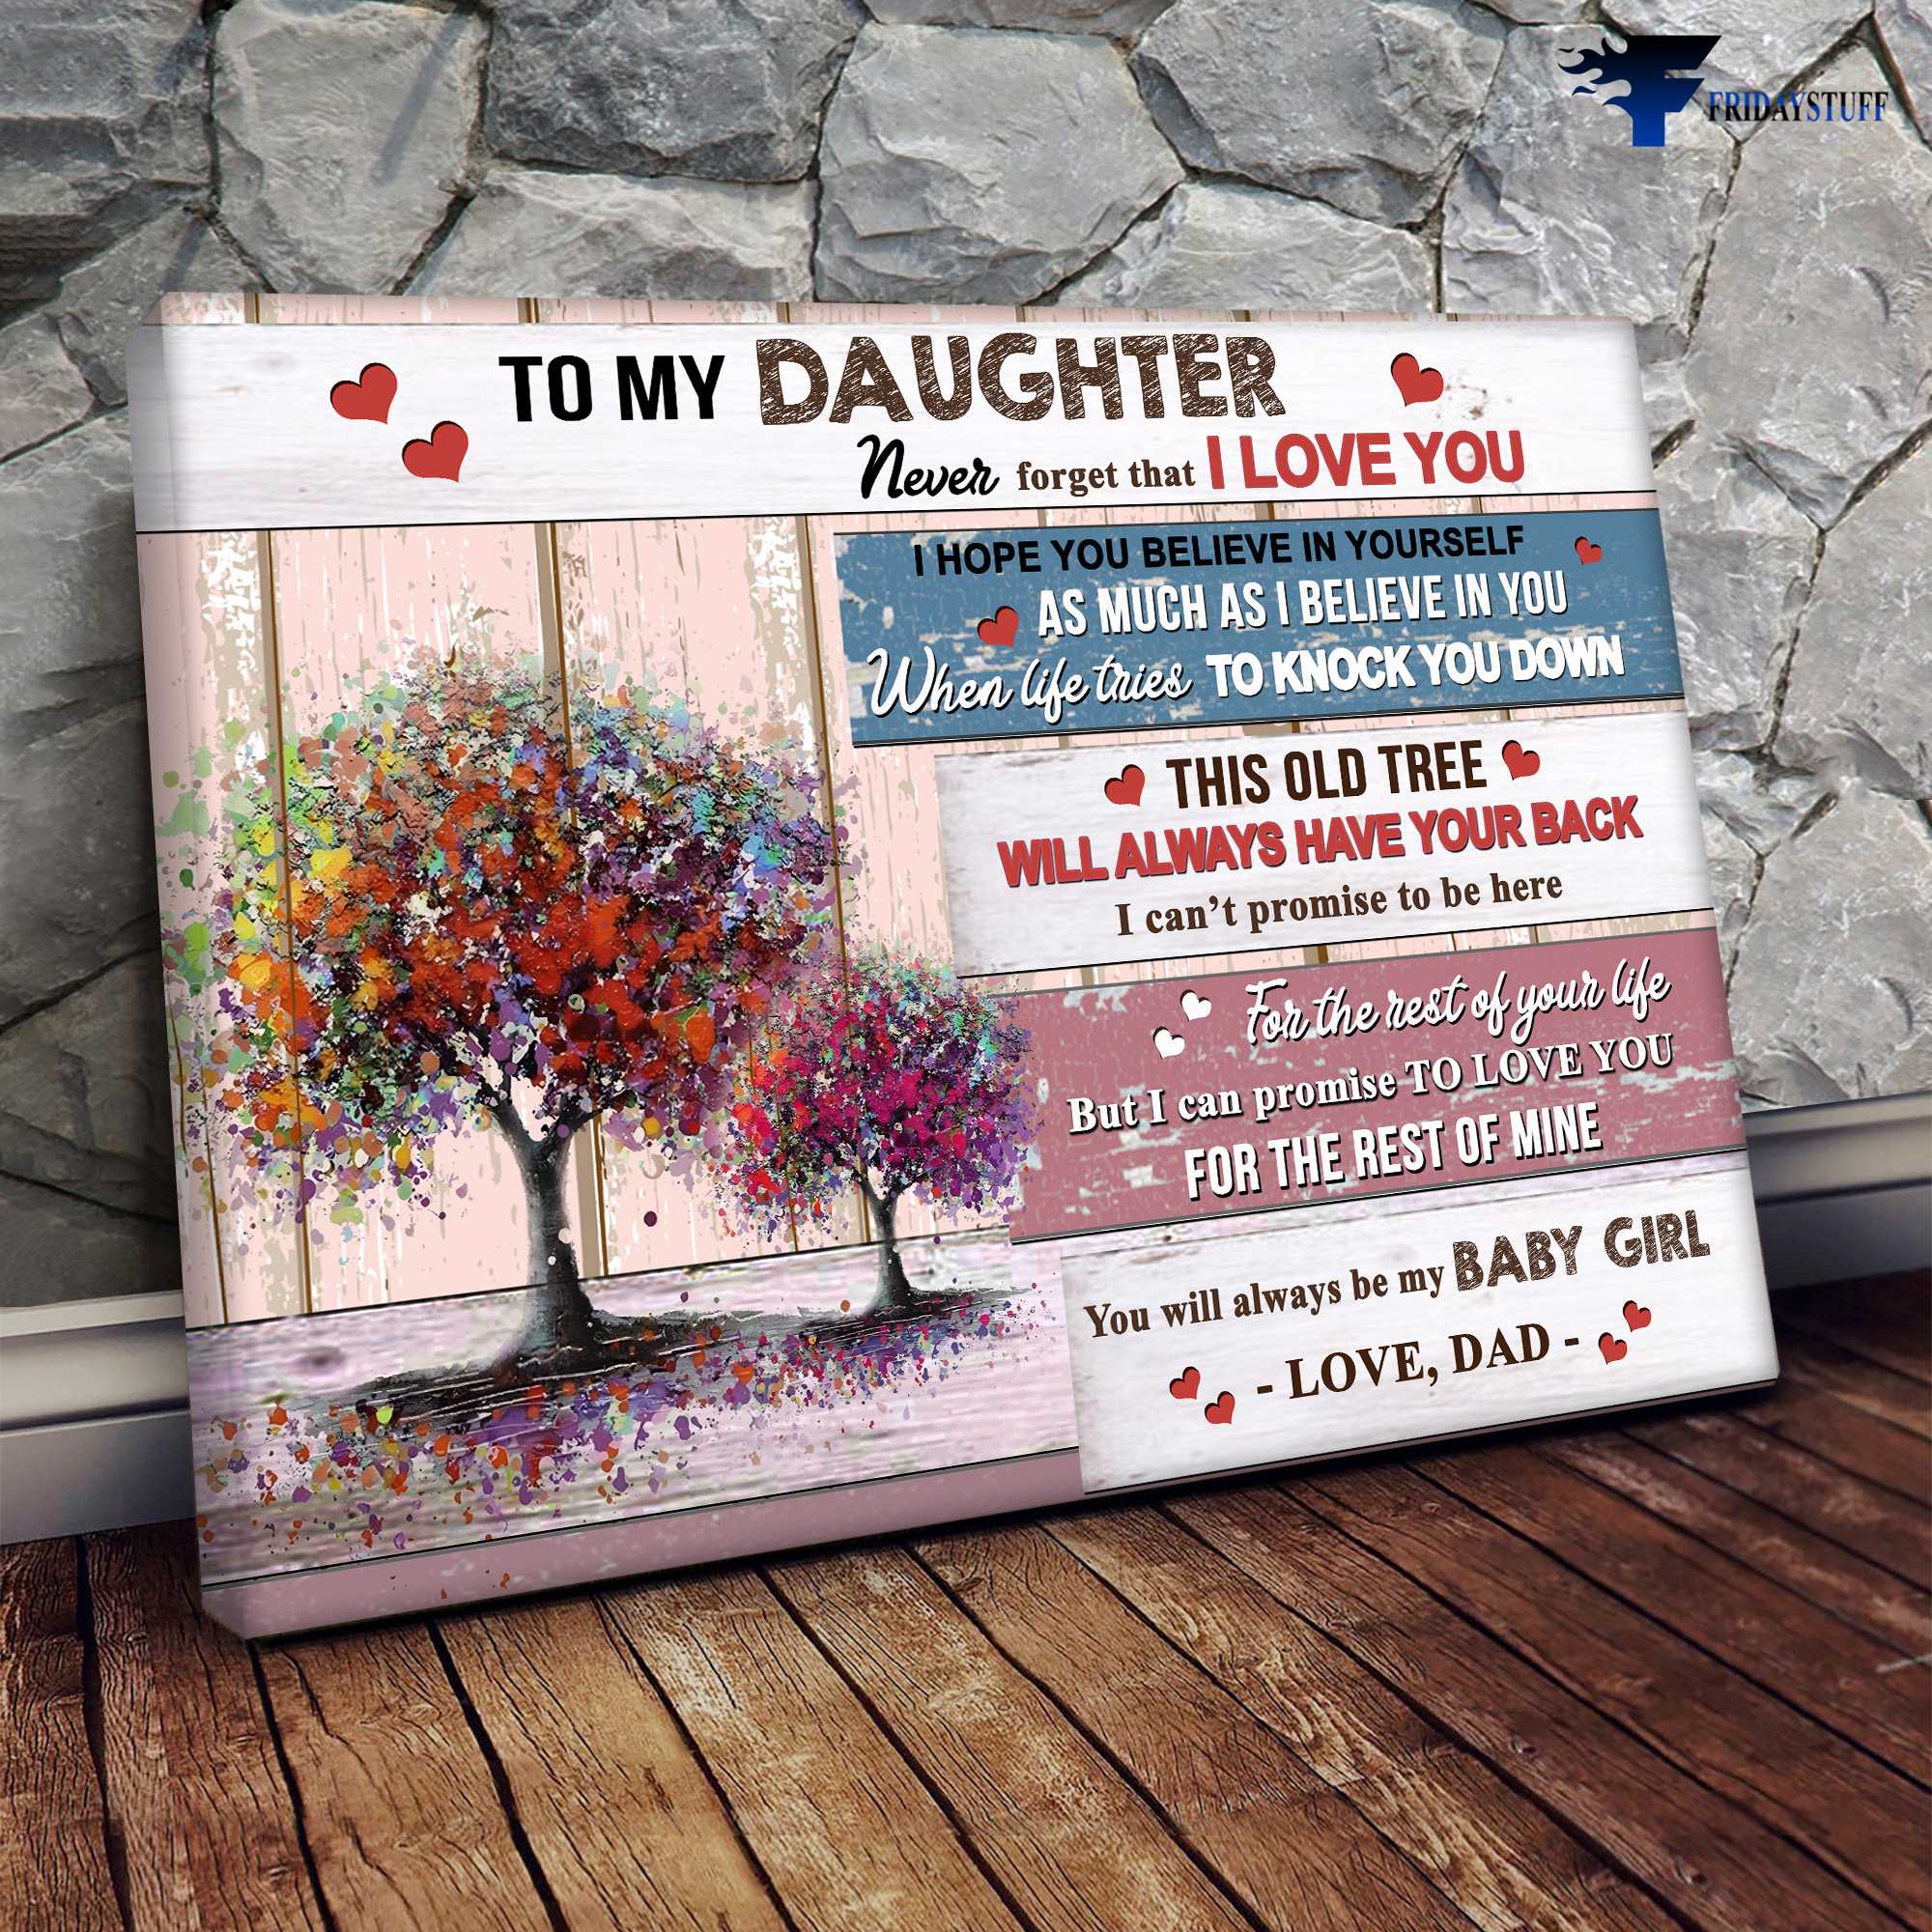 Dad And Daughter, To My Daughter, Family Poster, Never Forget That, I Love You, I Hope You Believe In Yourself, As Much As, I Believe In You, When life Tries To Knock You Down, This Old Lioness